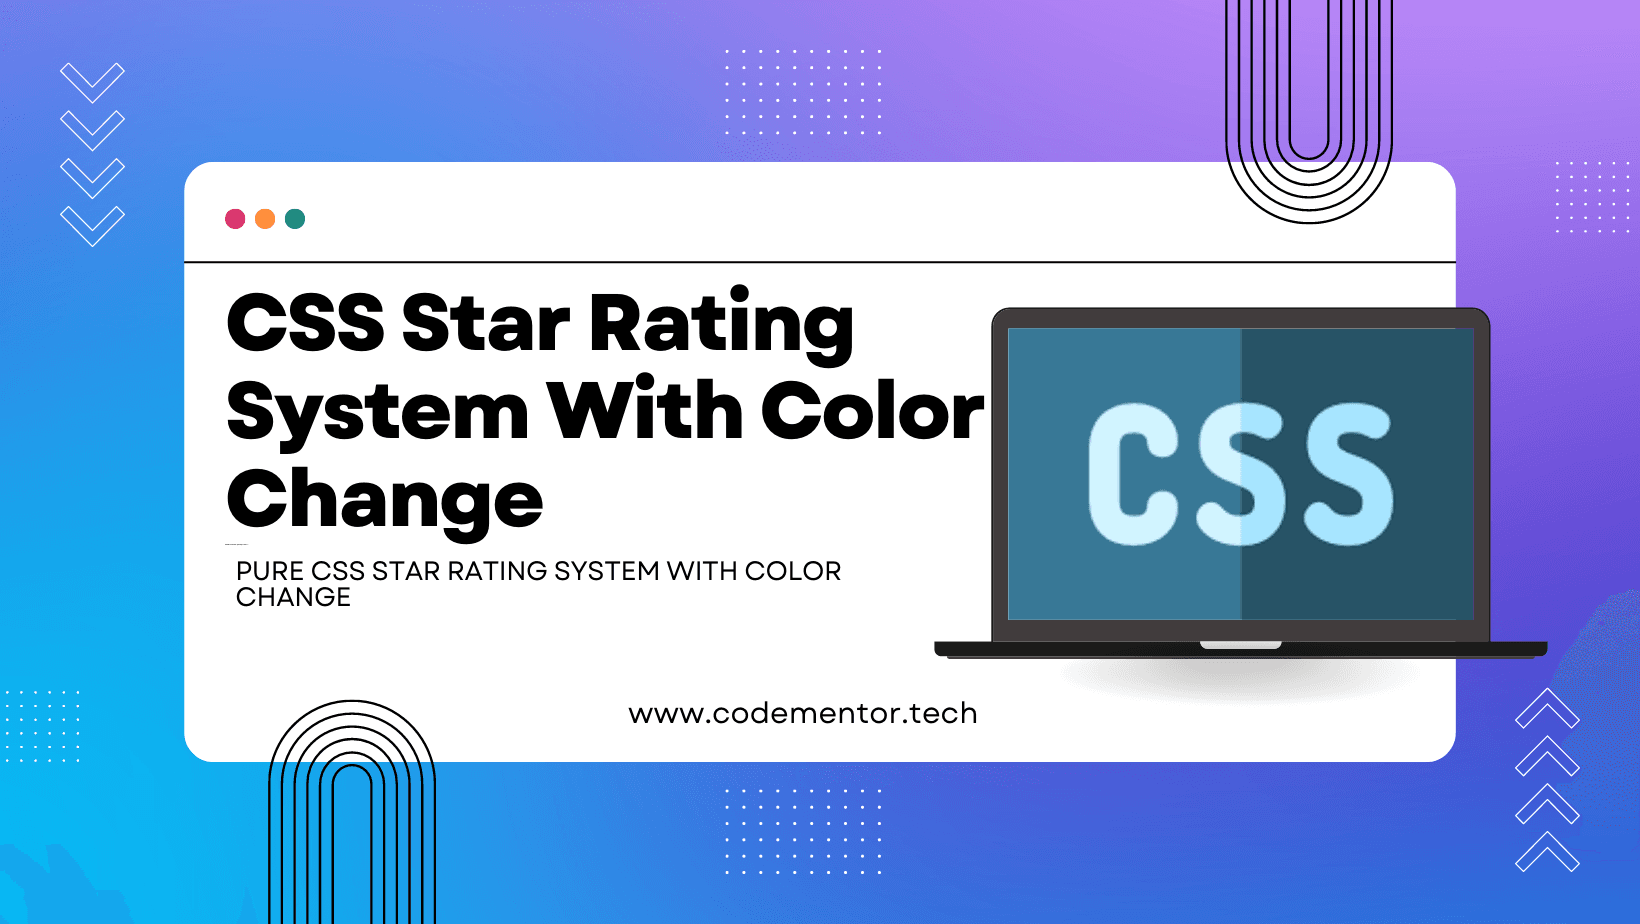 Pure CSS star rating system with color change - codementor.tech